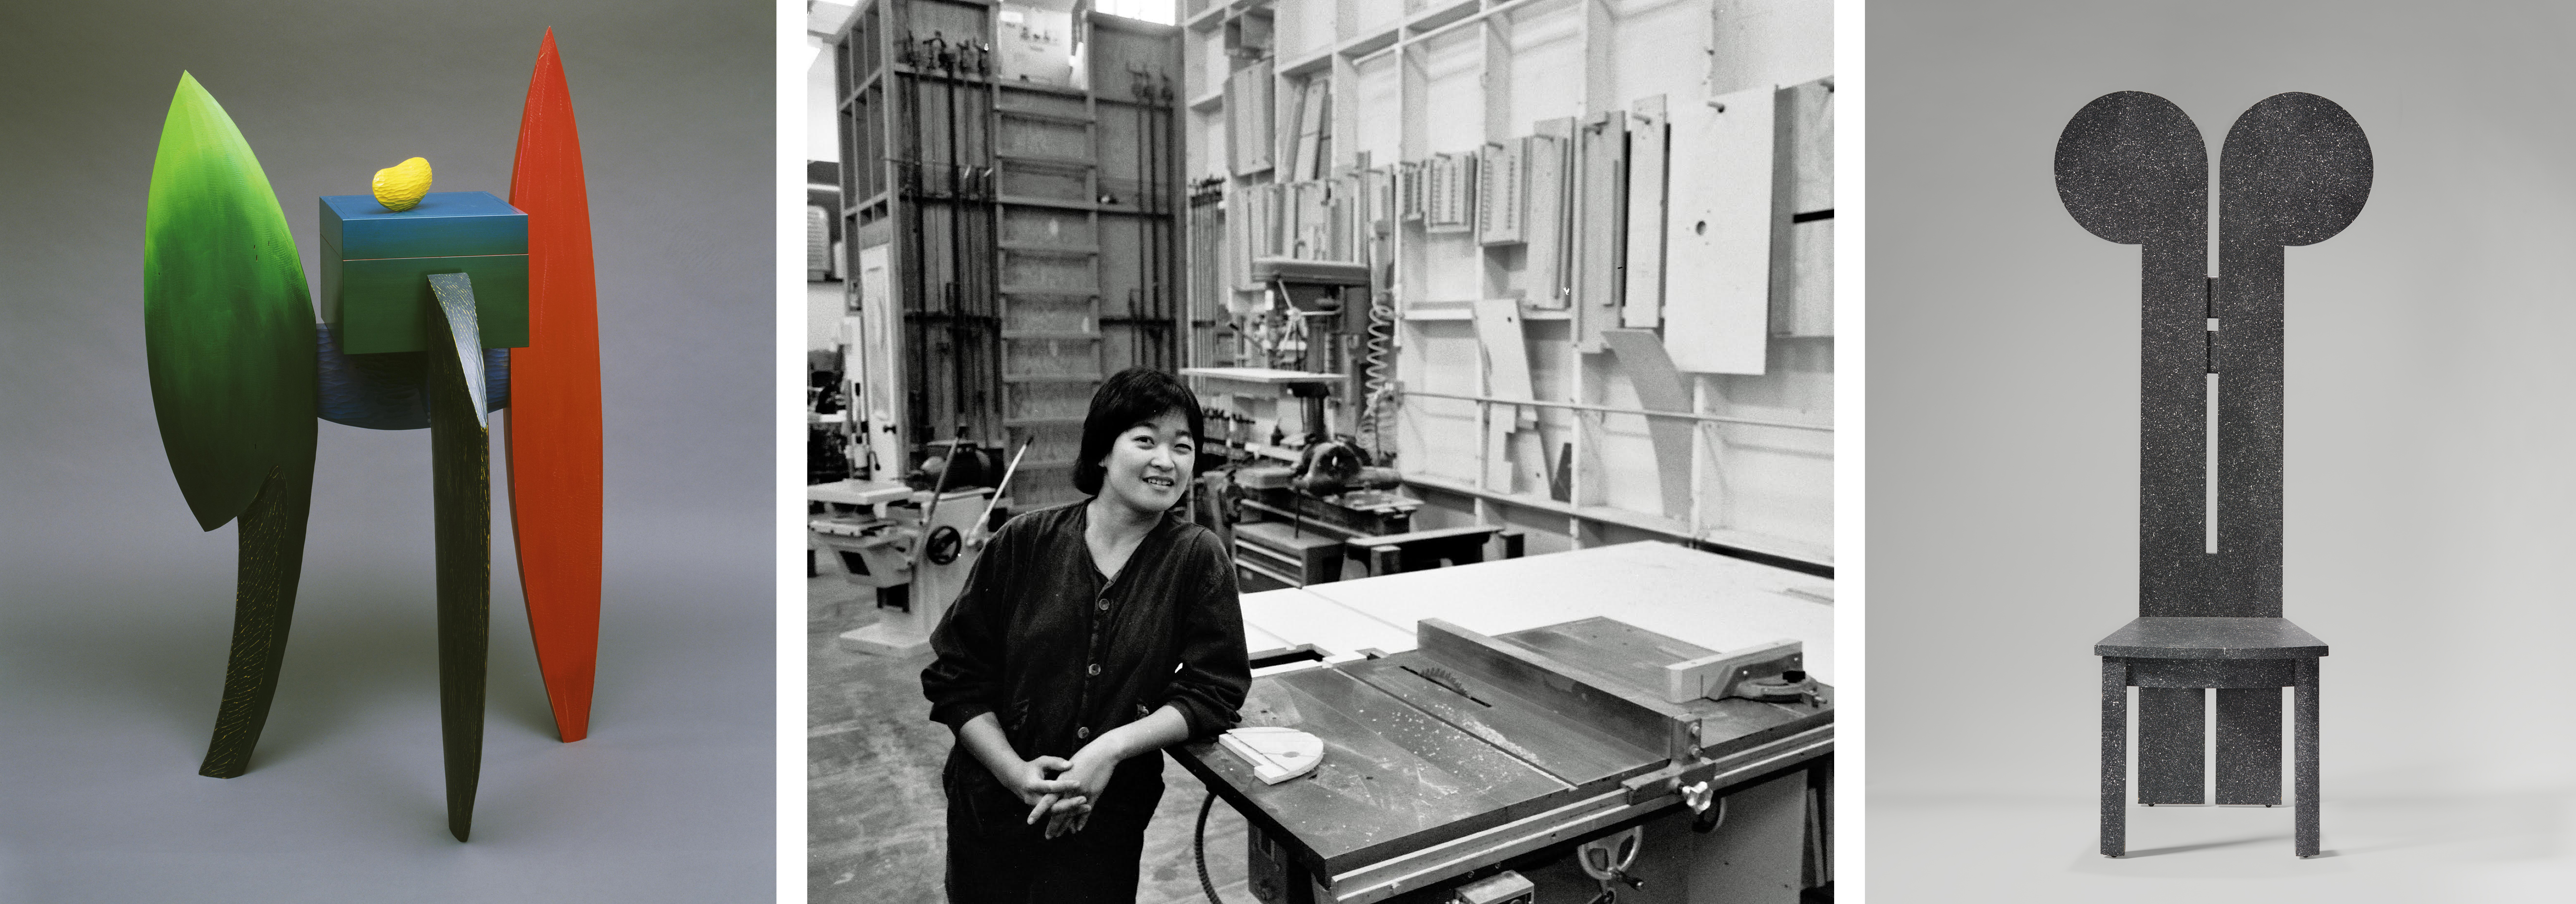 Wendy Maruyama in 1987, when she was head of the Woodworking and Furniture Design Program at California College of Arts and Crafts in Oakland. Homage to Jimmy Carter, 1991, a small cabinet with a peanut-shaped handle stands on leaf-shaped legs in red, variegated green and black. Mixing the iconography of influential historic furniture and California pop, Maruyama’s Mickey Mackintosh Chair, 1988, is made of maple spattered in Zolatone paint. Courtesy of Yale University Art Gallery, Friends of American Arts Acquisition Fund.